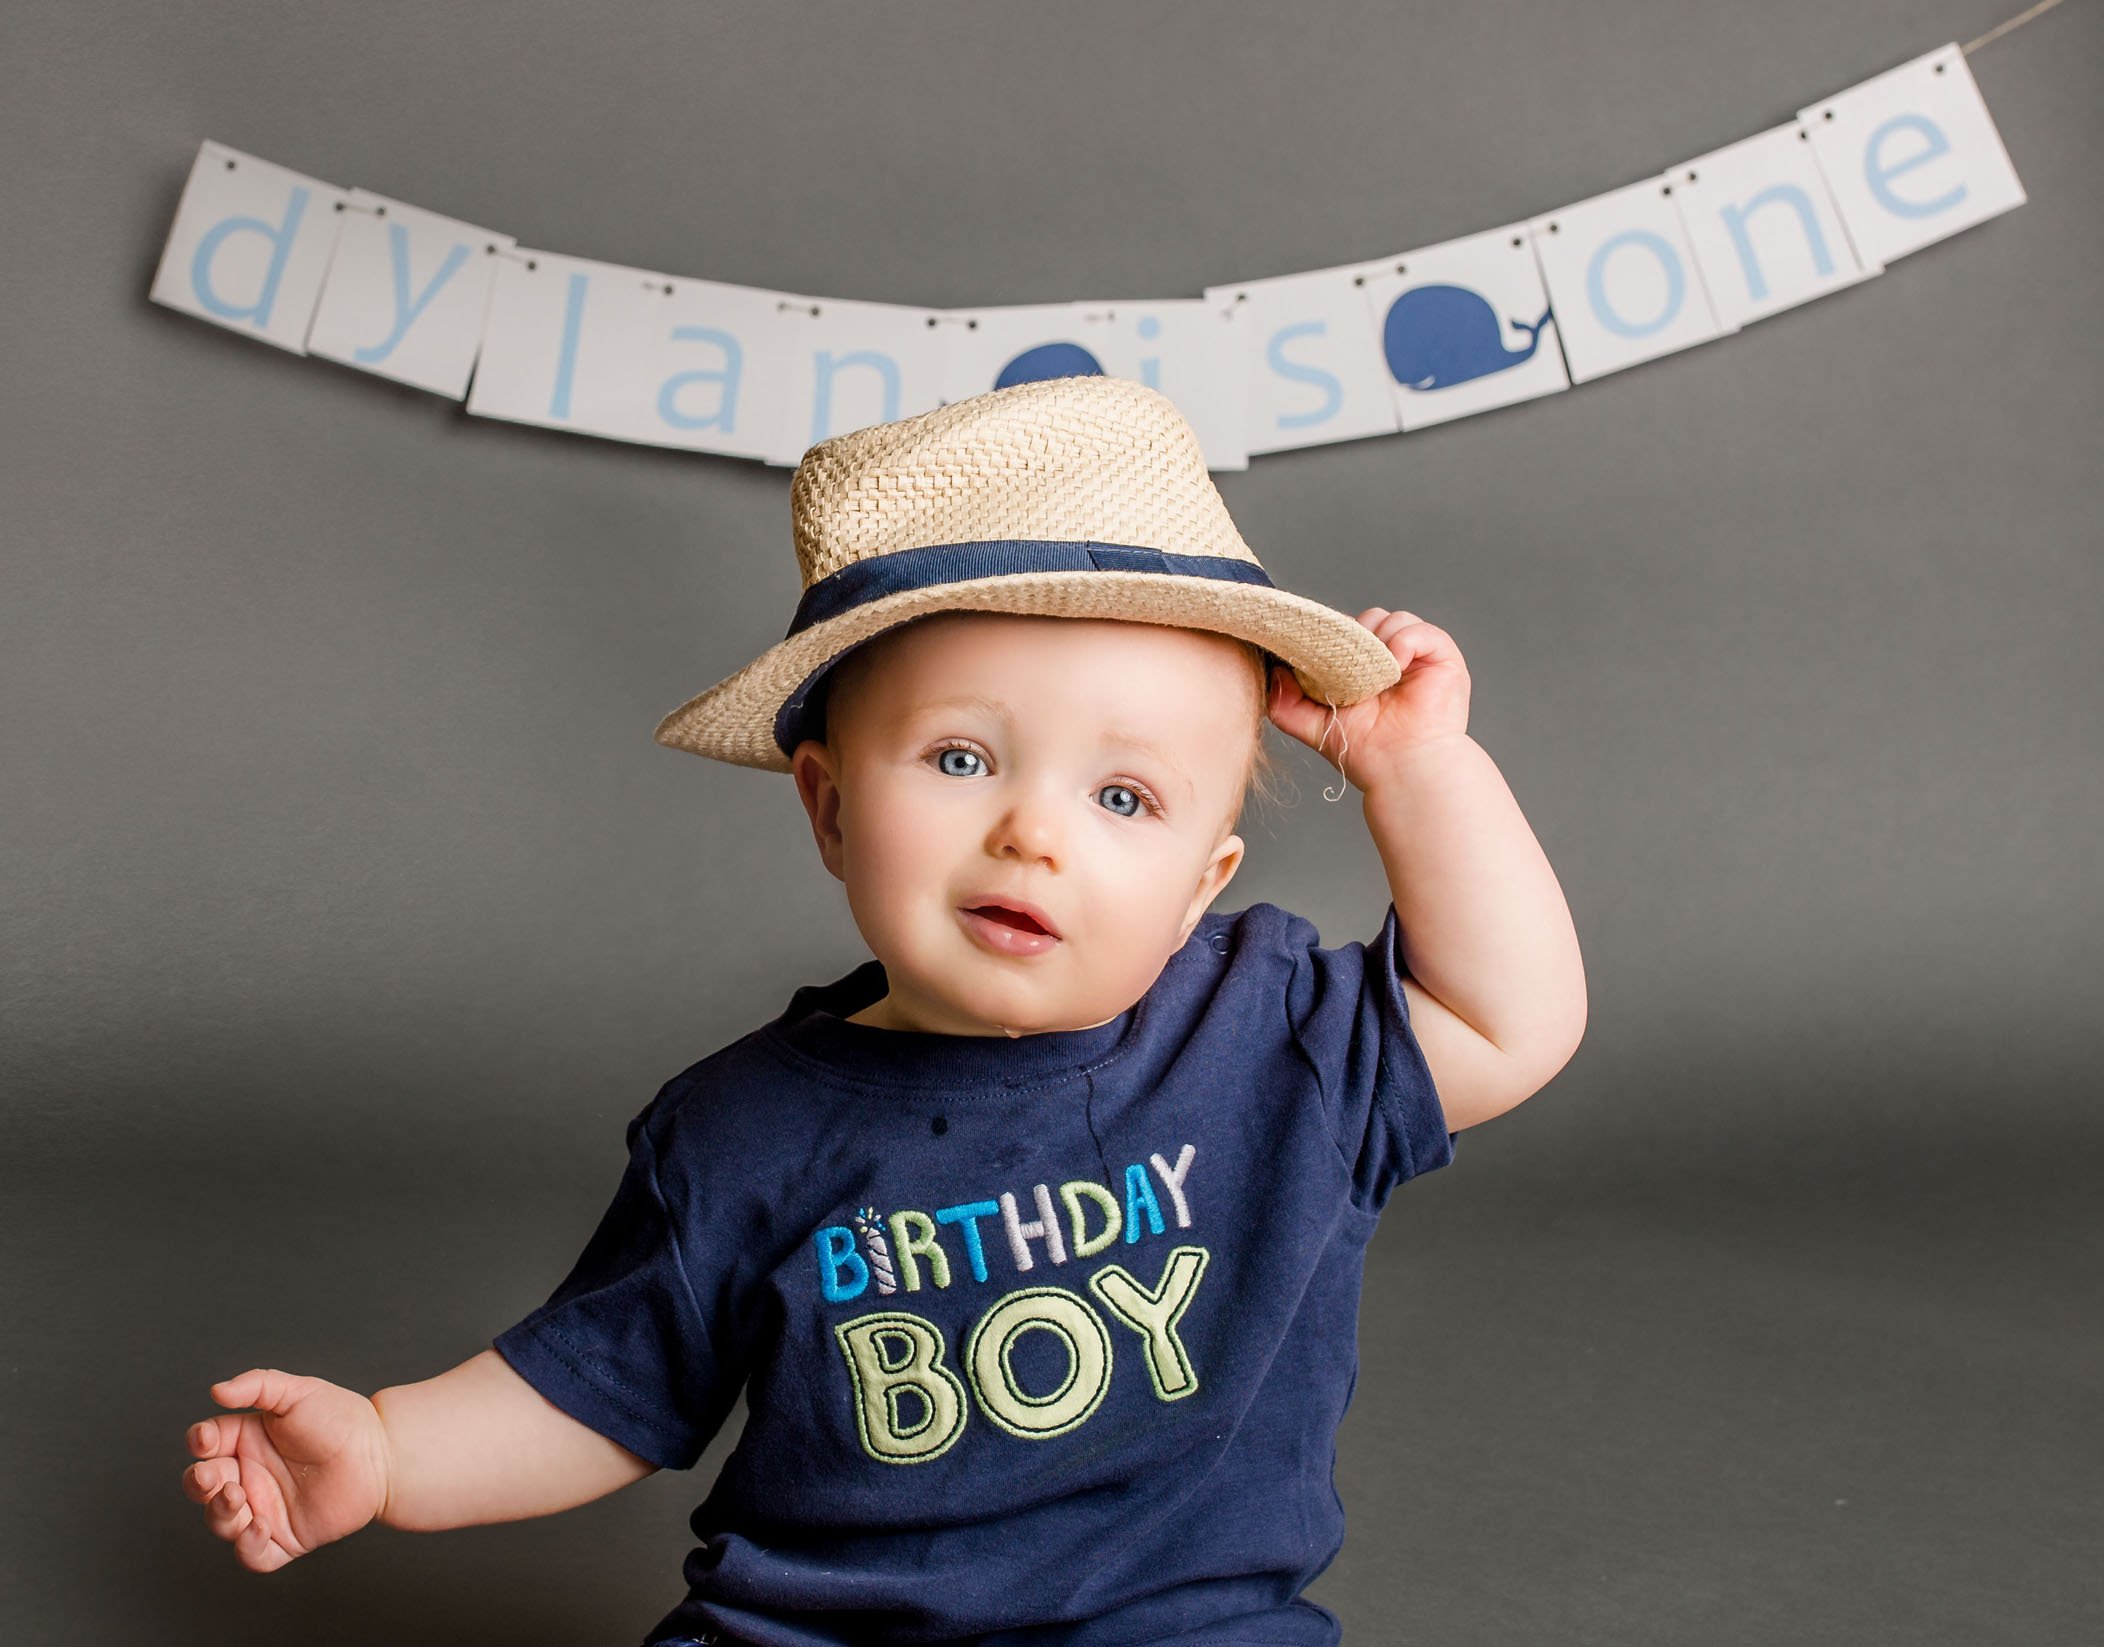 one year old baby with birthday shirt and hat on One Big Happy Photo